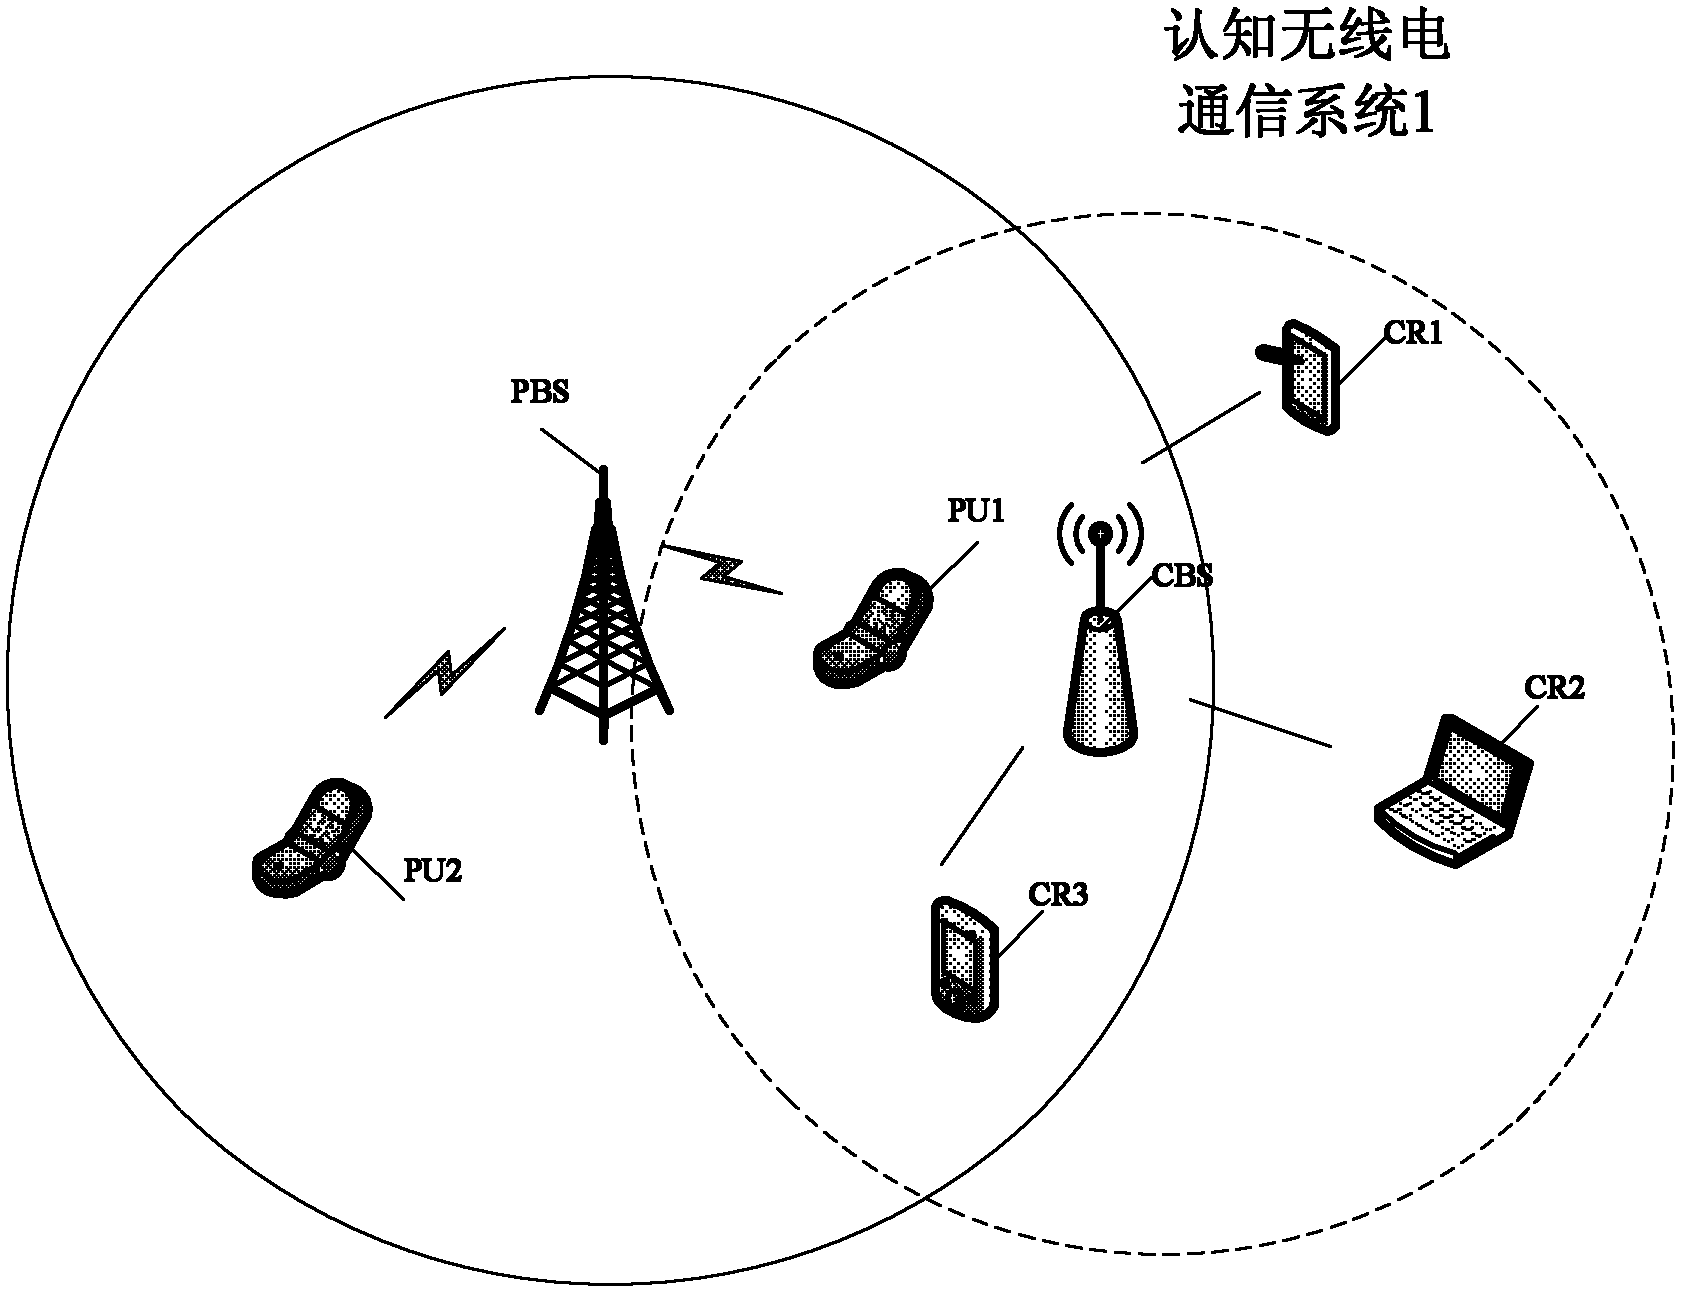 Multi-user admission control method and system in cognitive radio communication system